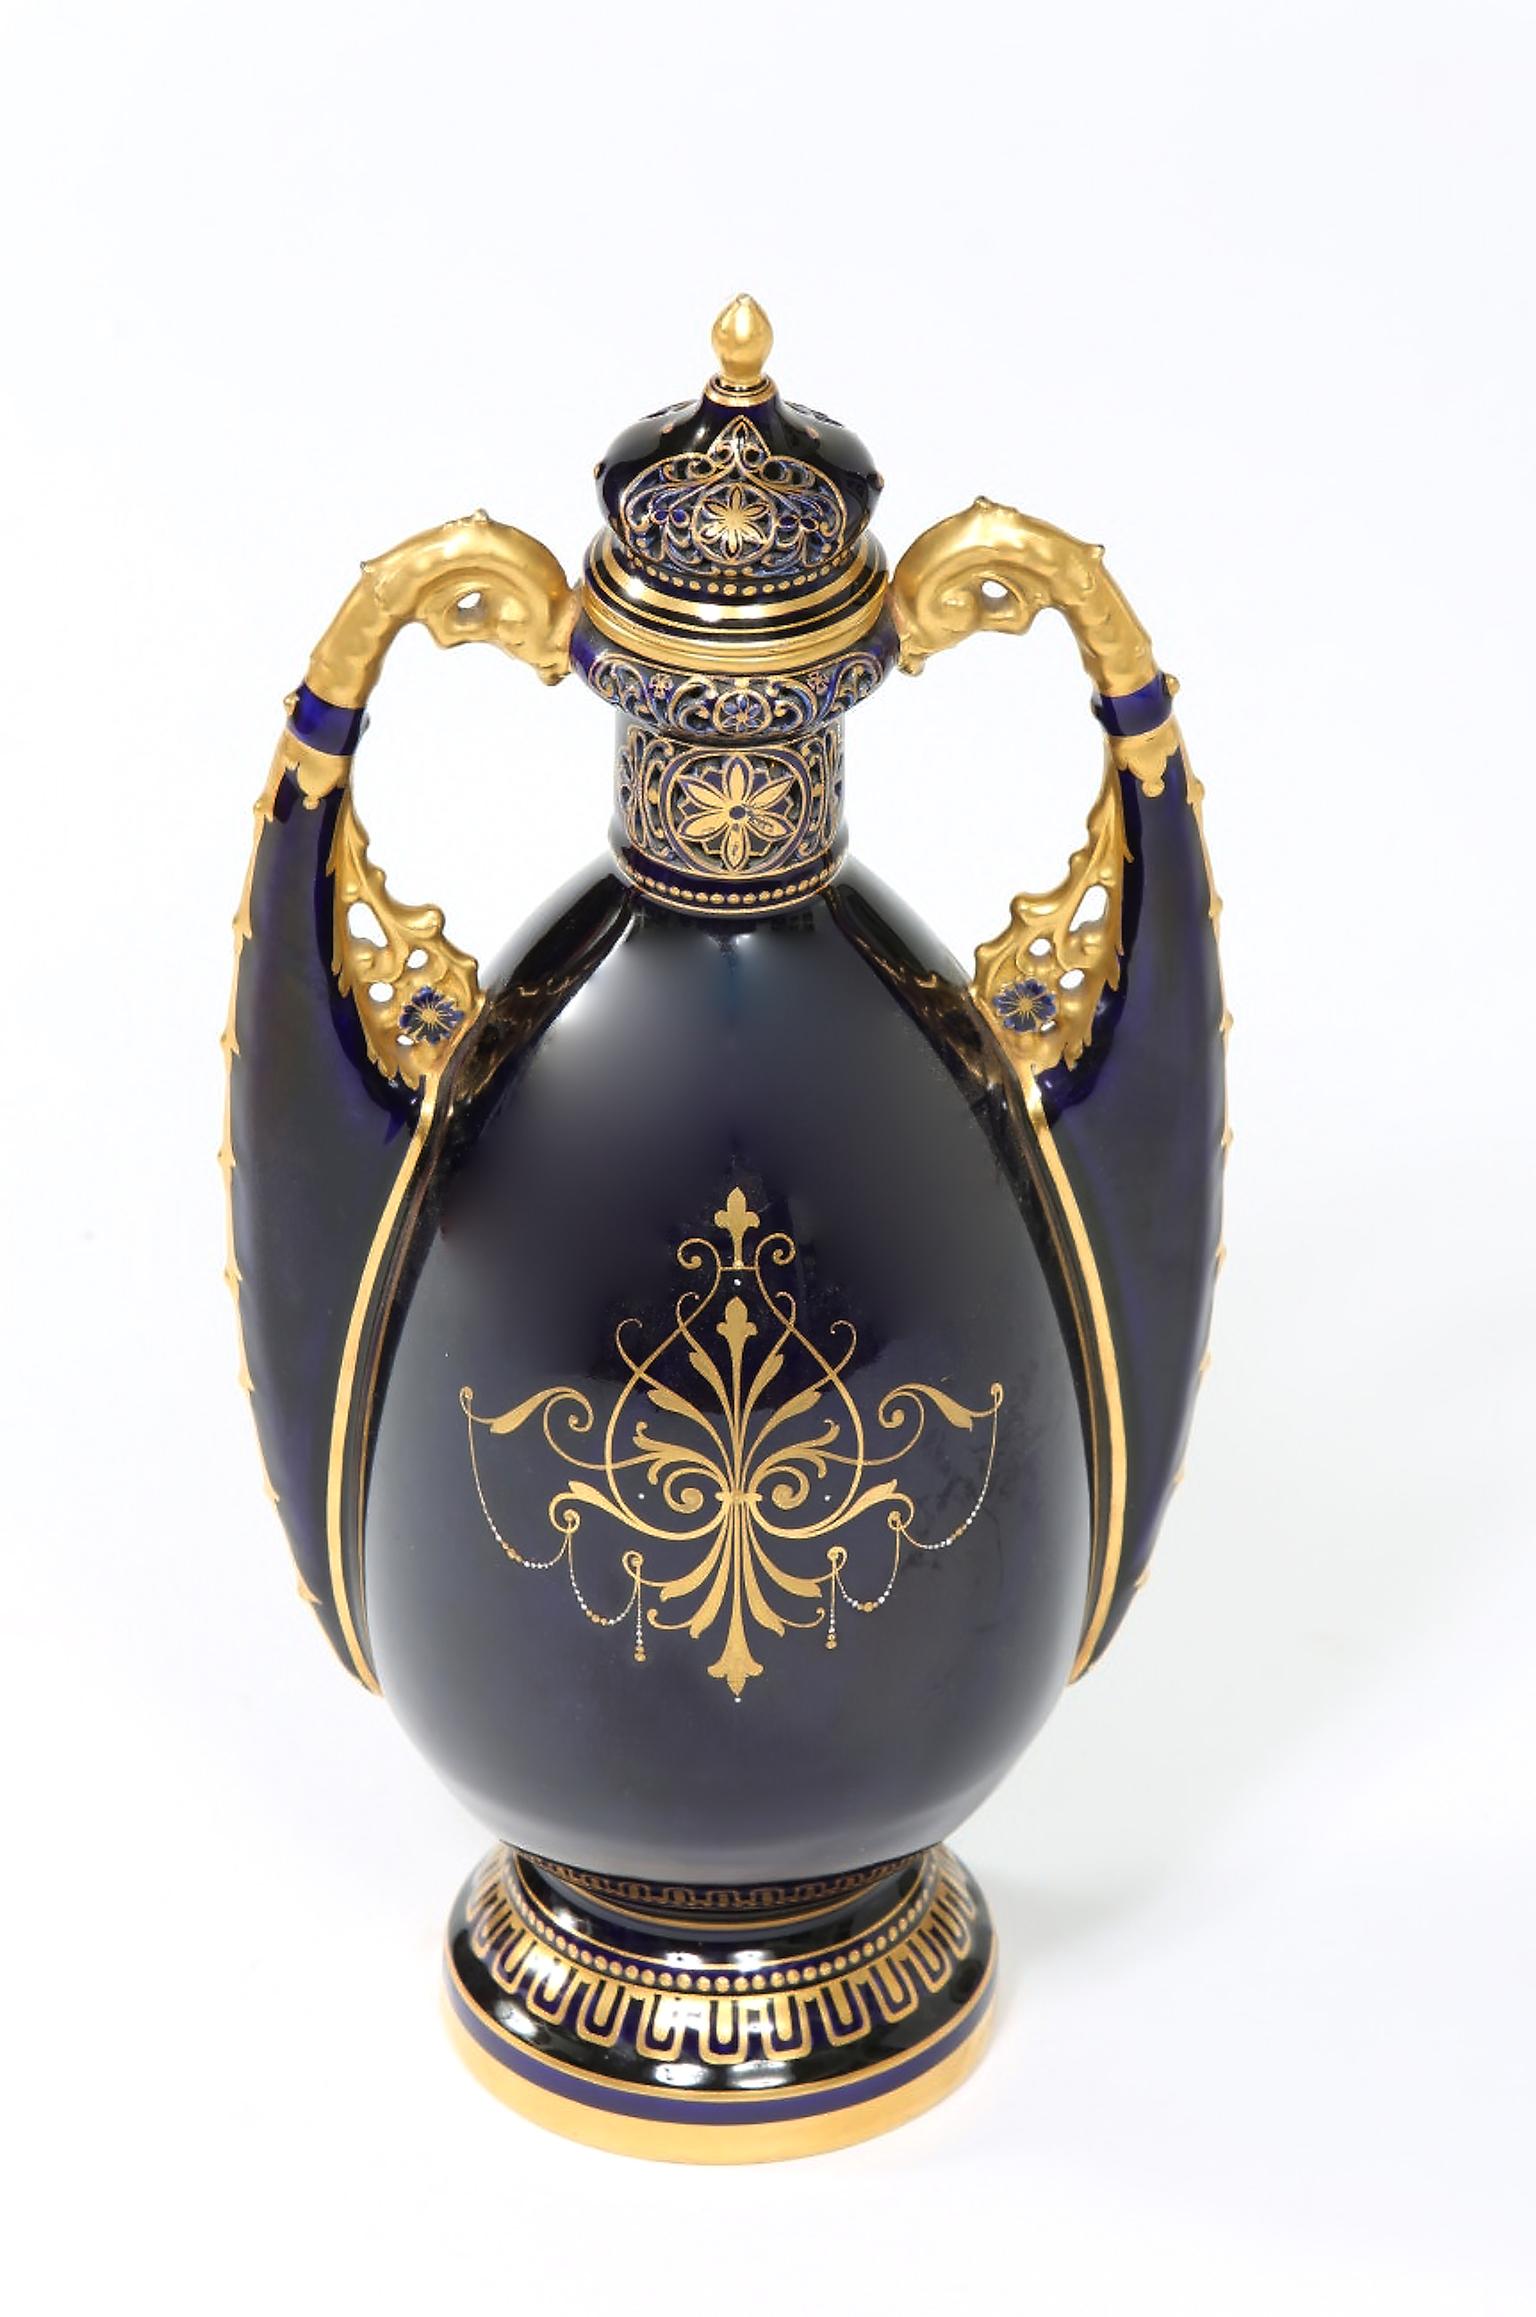 Royal Vienna cobalt blue with gilt gold design details porcelain decorative lidded urn with side handles. The covered urn is in great condition with minor wear consistent with age / use. Maker's mark undersigned. The piece stand about 16 inches high